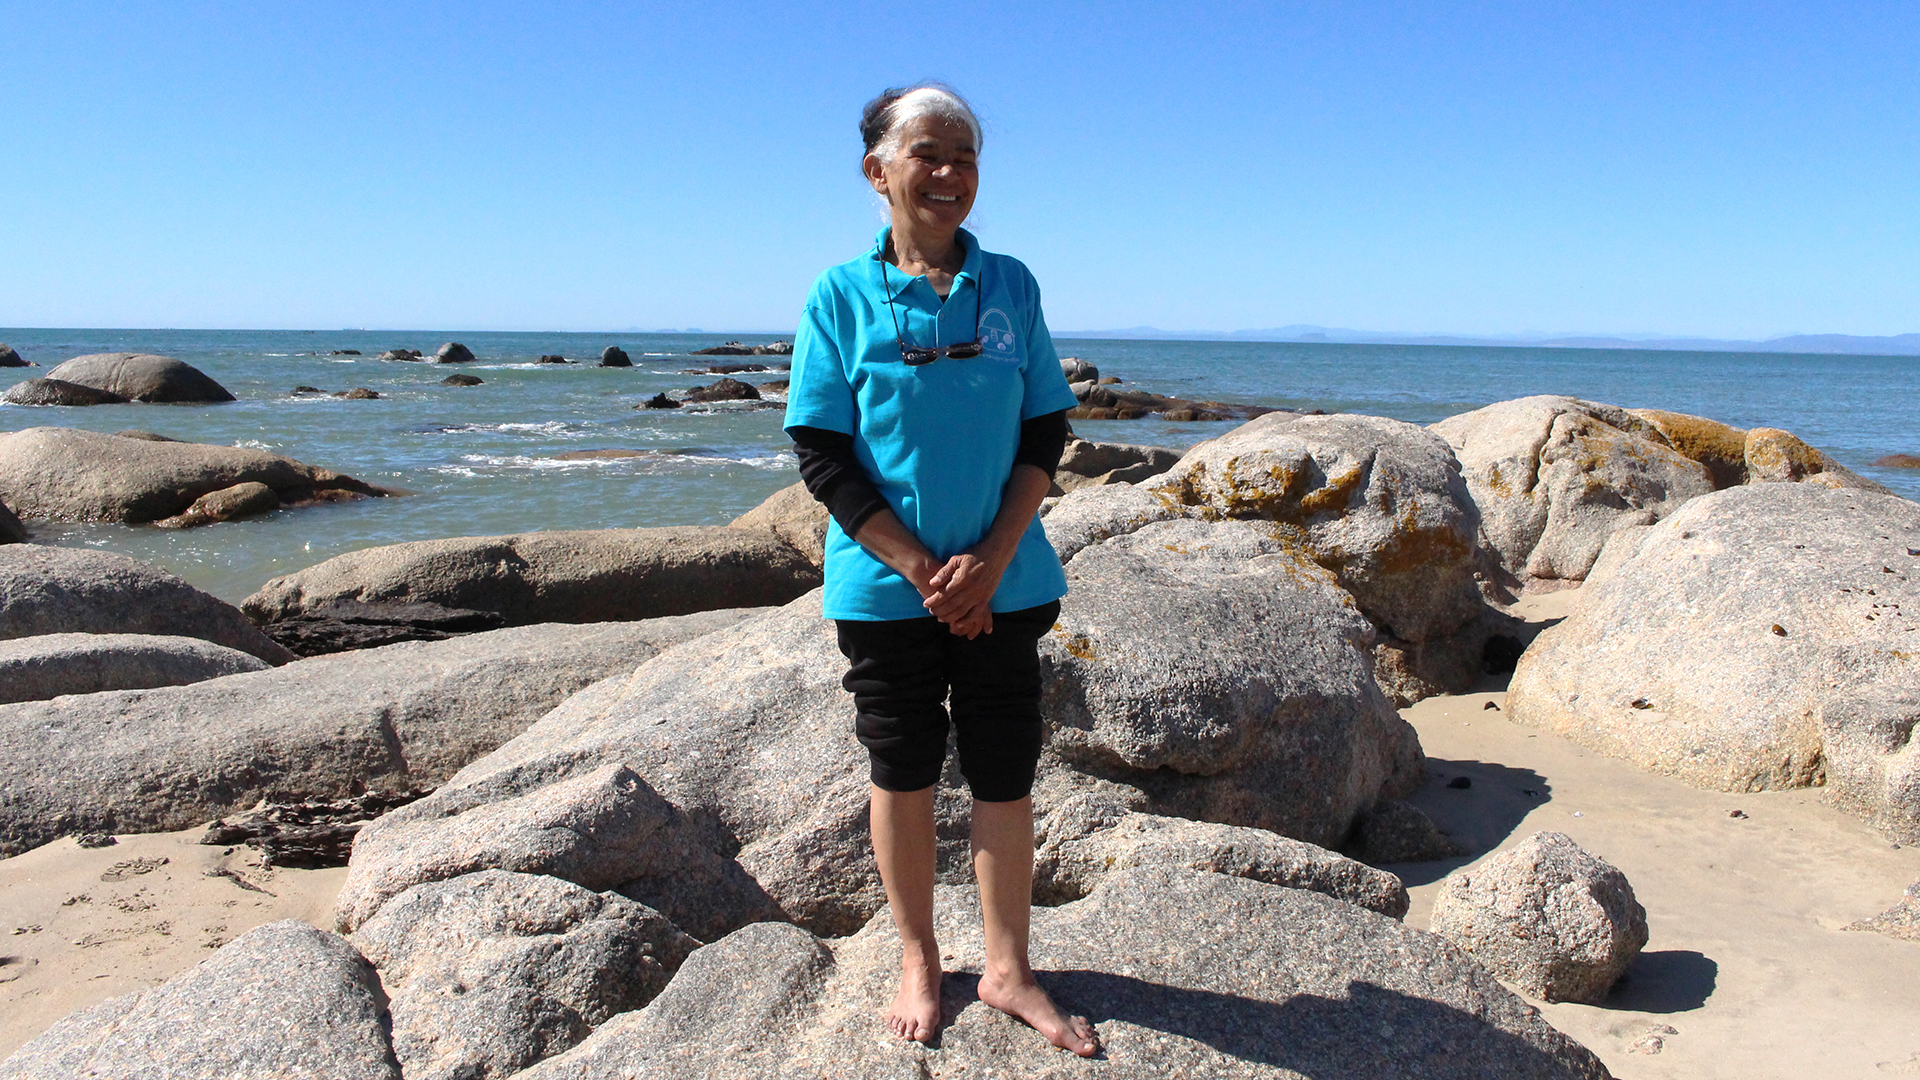 Hilda Adams, a fighter for people and the planet in Steenberg’s Cove